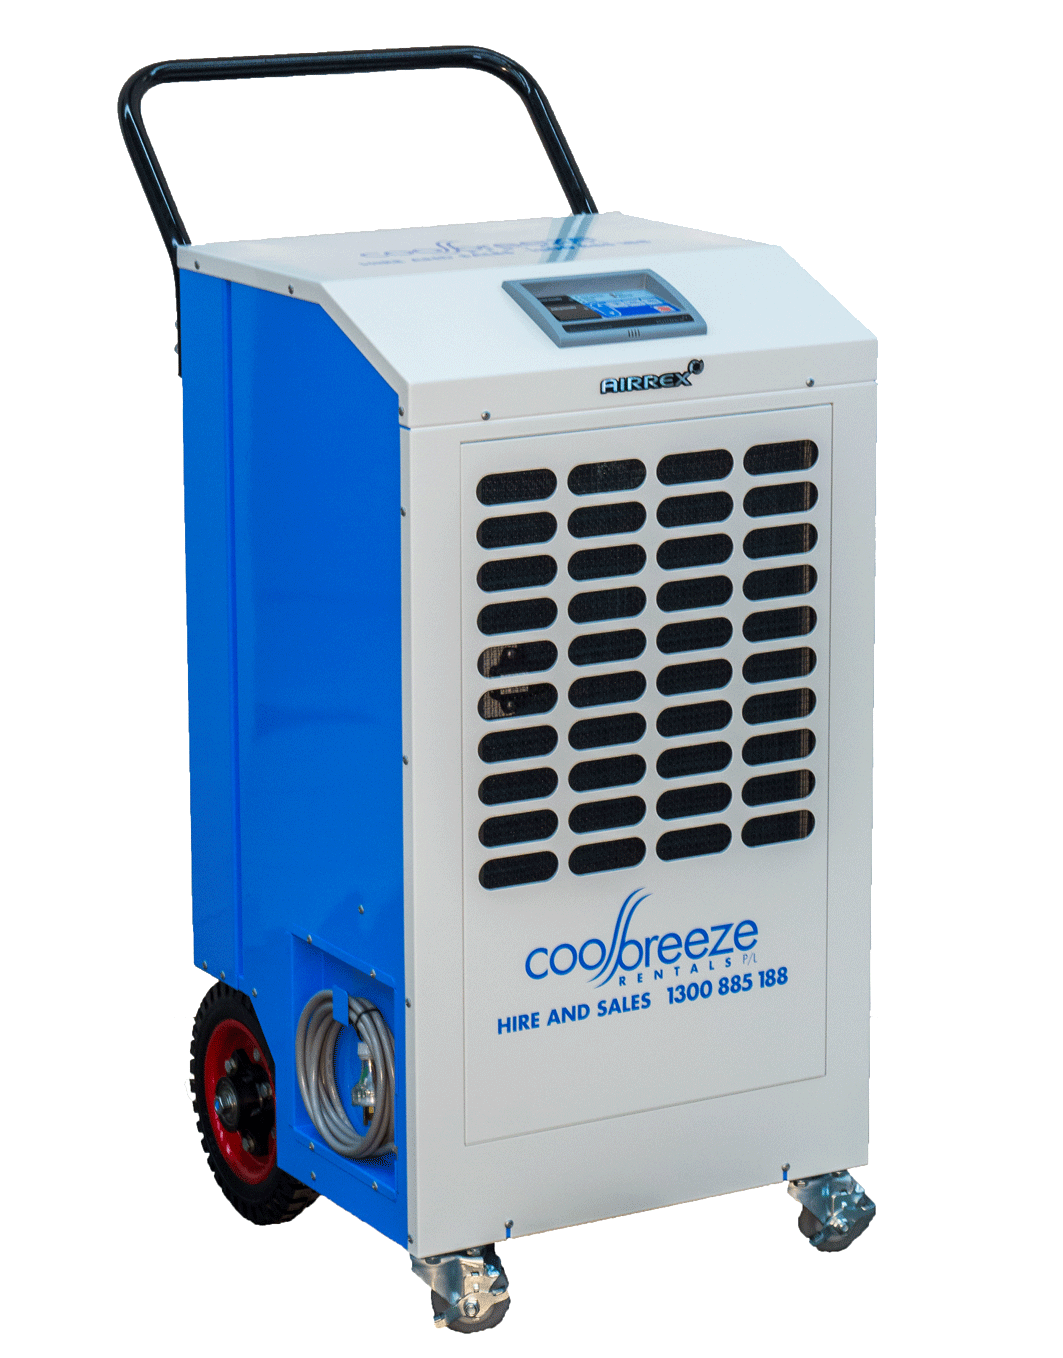 ADH1000 Dehumidifier 120L/Day - Dehumidifiers - Restoration - Products